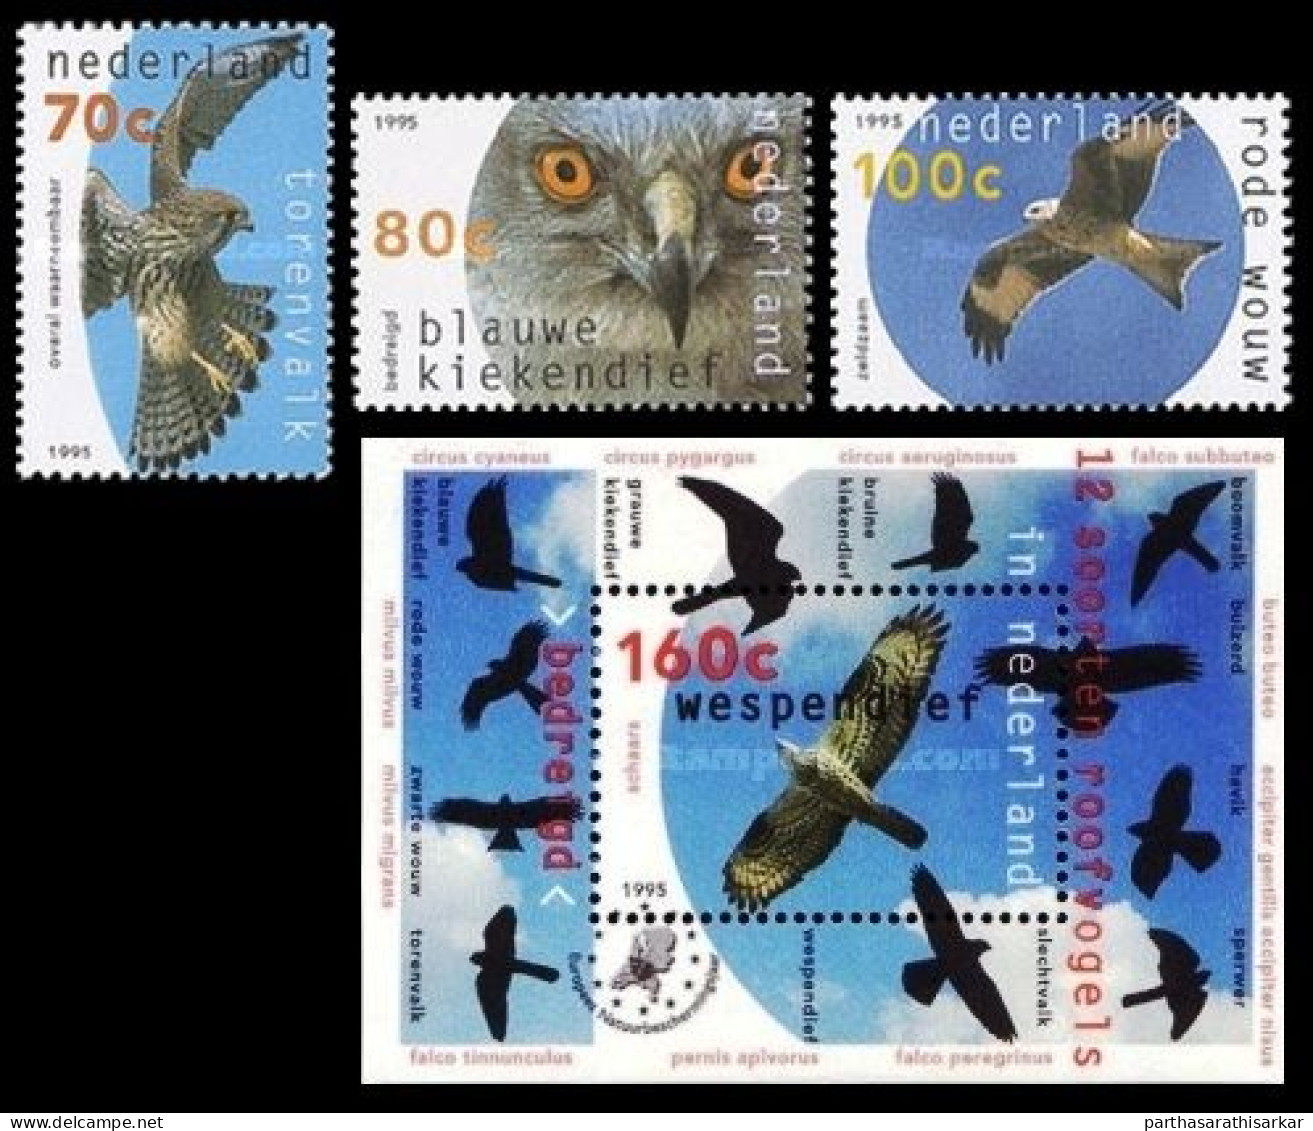 NETHERLANDS 1995 BIRDS OF PREY COMPLETE SET WITH MINIATURE SHEET MS MNH - Aigles & Rapaces Diurnes